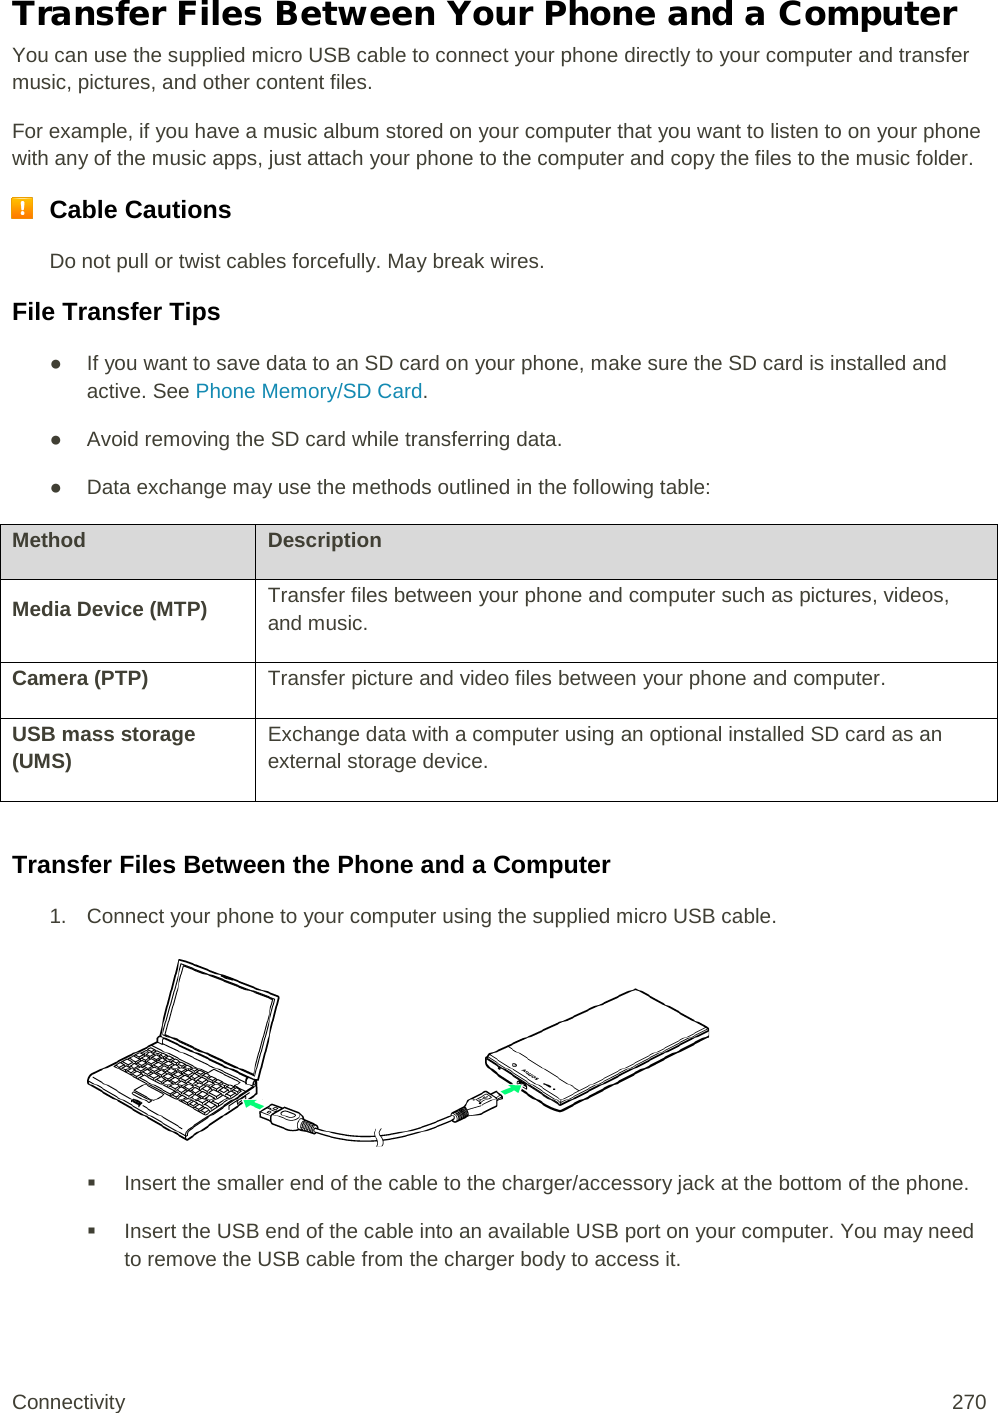 Transfer Files Between Your Phone and a Computer You can use the supplied micro USB cable to connect your phone directly to your computer and transfer music, pictures, and other content files.  For example, if you have a music album stored on your computer that you want to listen to on your phone with any of the music apps, just attach your phone to the computer and copy the files to the music folder.  Cable Cautions Do not pull or twist cables forcefully. May break wires. File Transfer Tips ● If you want to save data to an SD card on your phone, make sure the SD card is installed and active. See Phone Memory/SD Card. ● Avoid removing the SD card while transferring data. ● Data exchange may use the methods outlined in the following table: Method Description Media Device (MTP) Transfer files between your phone and computer such as pictures, videos, and music. Camera (PTP) Transfer picture and video files between your phone and computer. USB mass storage (UMS) Exchange data with a computer using an optional installed SD card as an external storage device.  Transfer Files Between the Phone and a Computer 1. Connect your phone to your computer using the supplied micro USB cable.    Insert the smaller end of the cable to the charger/accessory jack at the bottom of the phone.  Insert the USB end of the cable into an available USB port on your computer. You may need to remove the USB cable from the charger body to access it.  Connectivity 270   